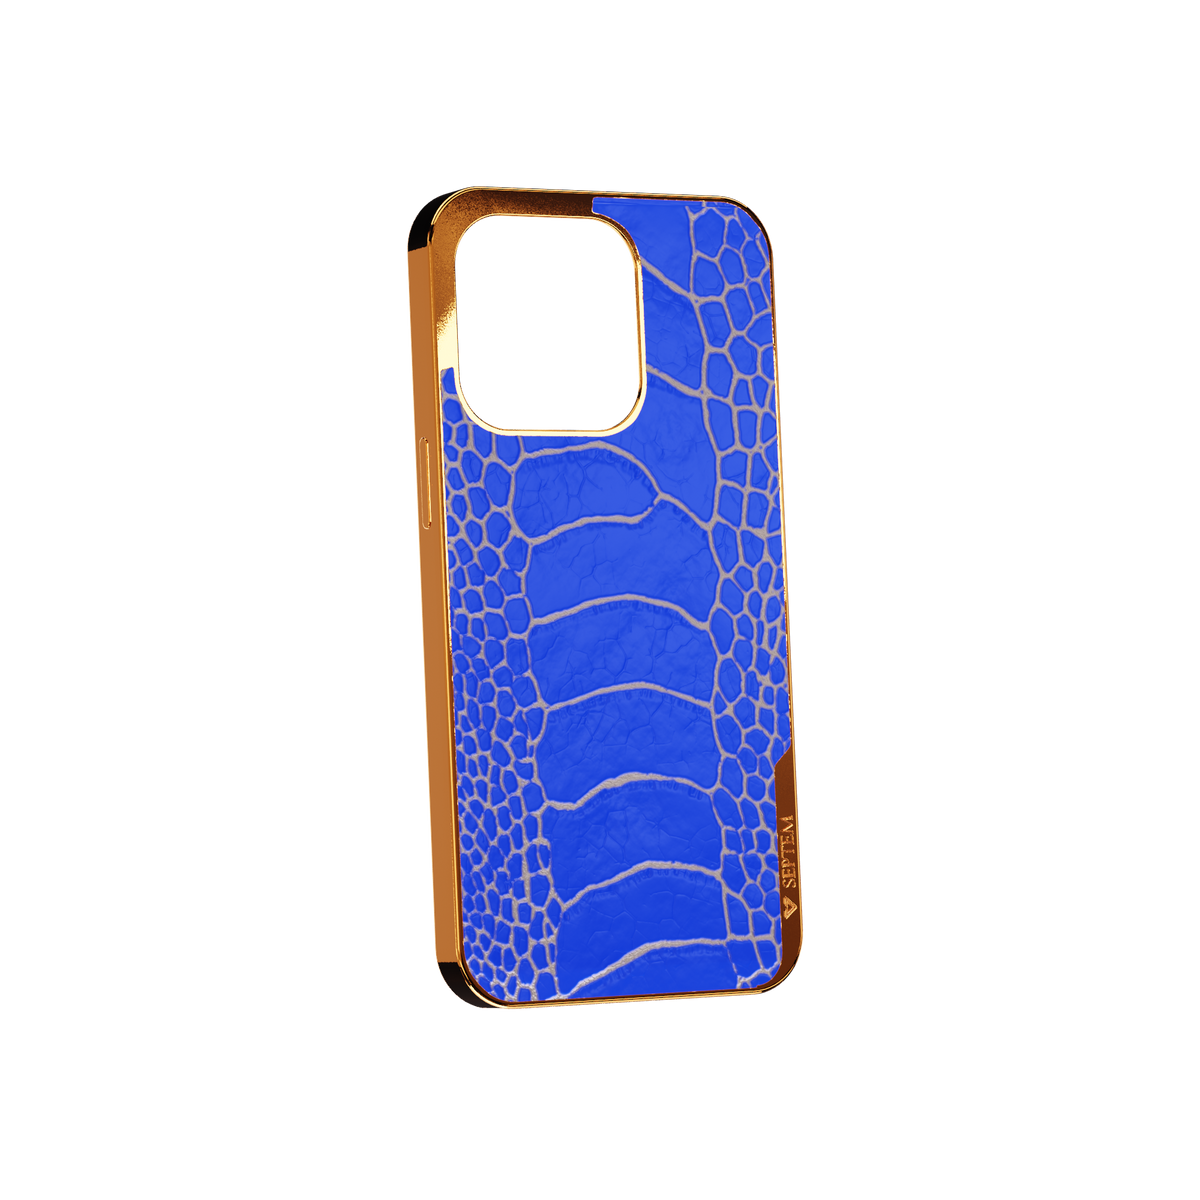 Blue Gold Ostrich Leg Fused Leather iPhone Case